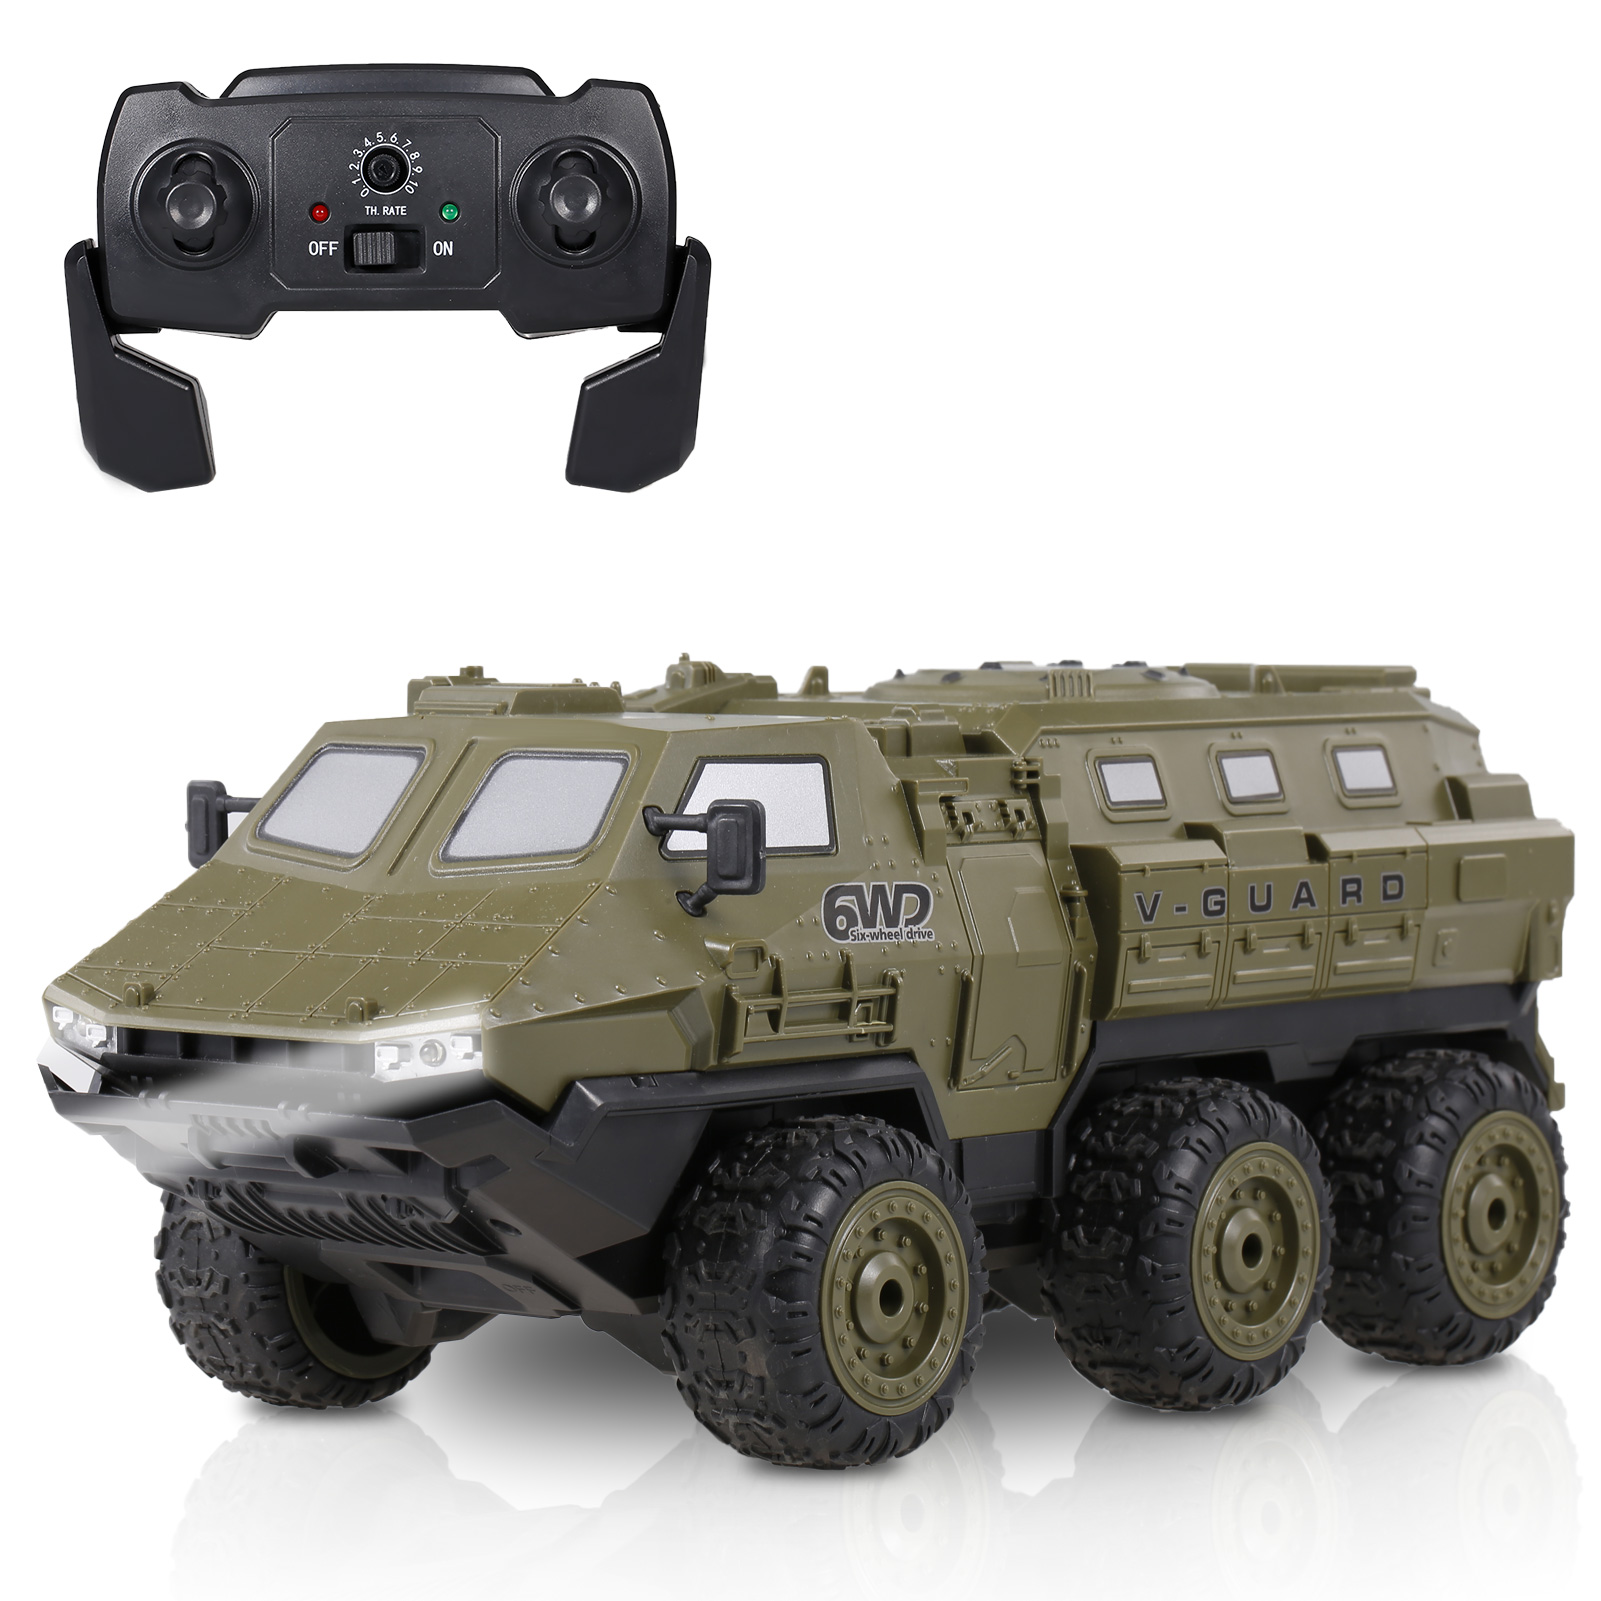 9510E RC Military Truck 1:16 6WD 2.4GHz Army Truck High Speed 30KM/H RTR With Super Bright LED Headlights Powerful Motor